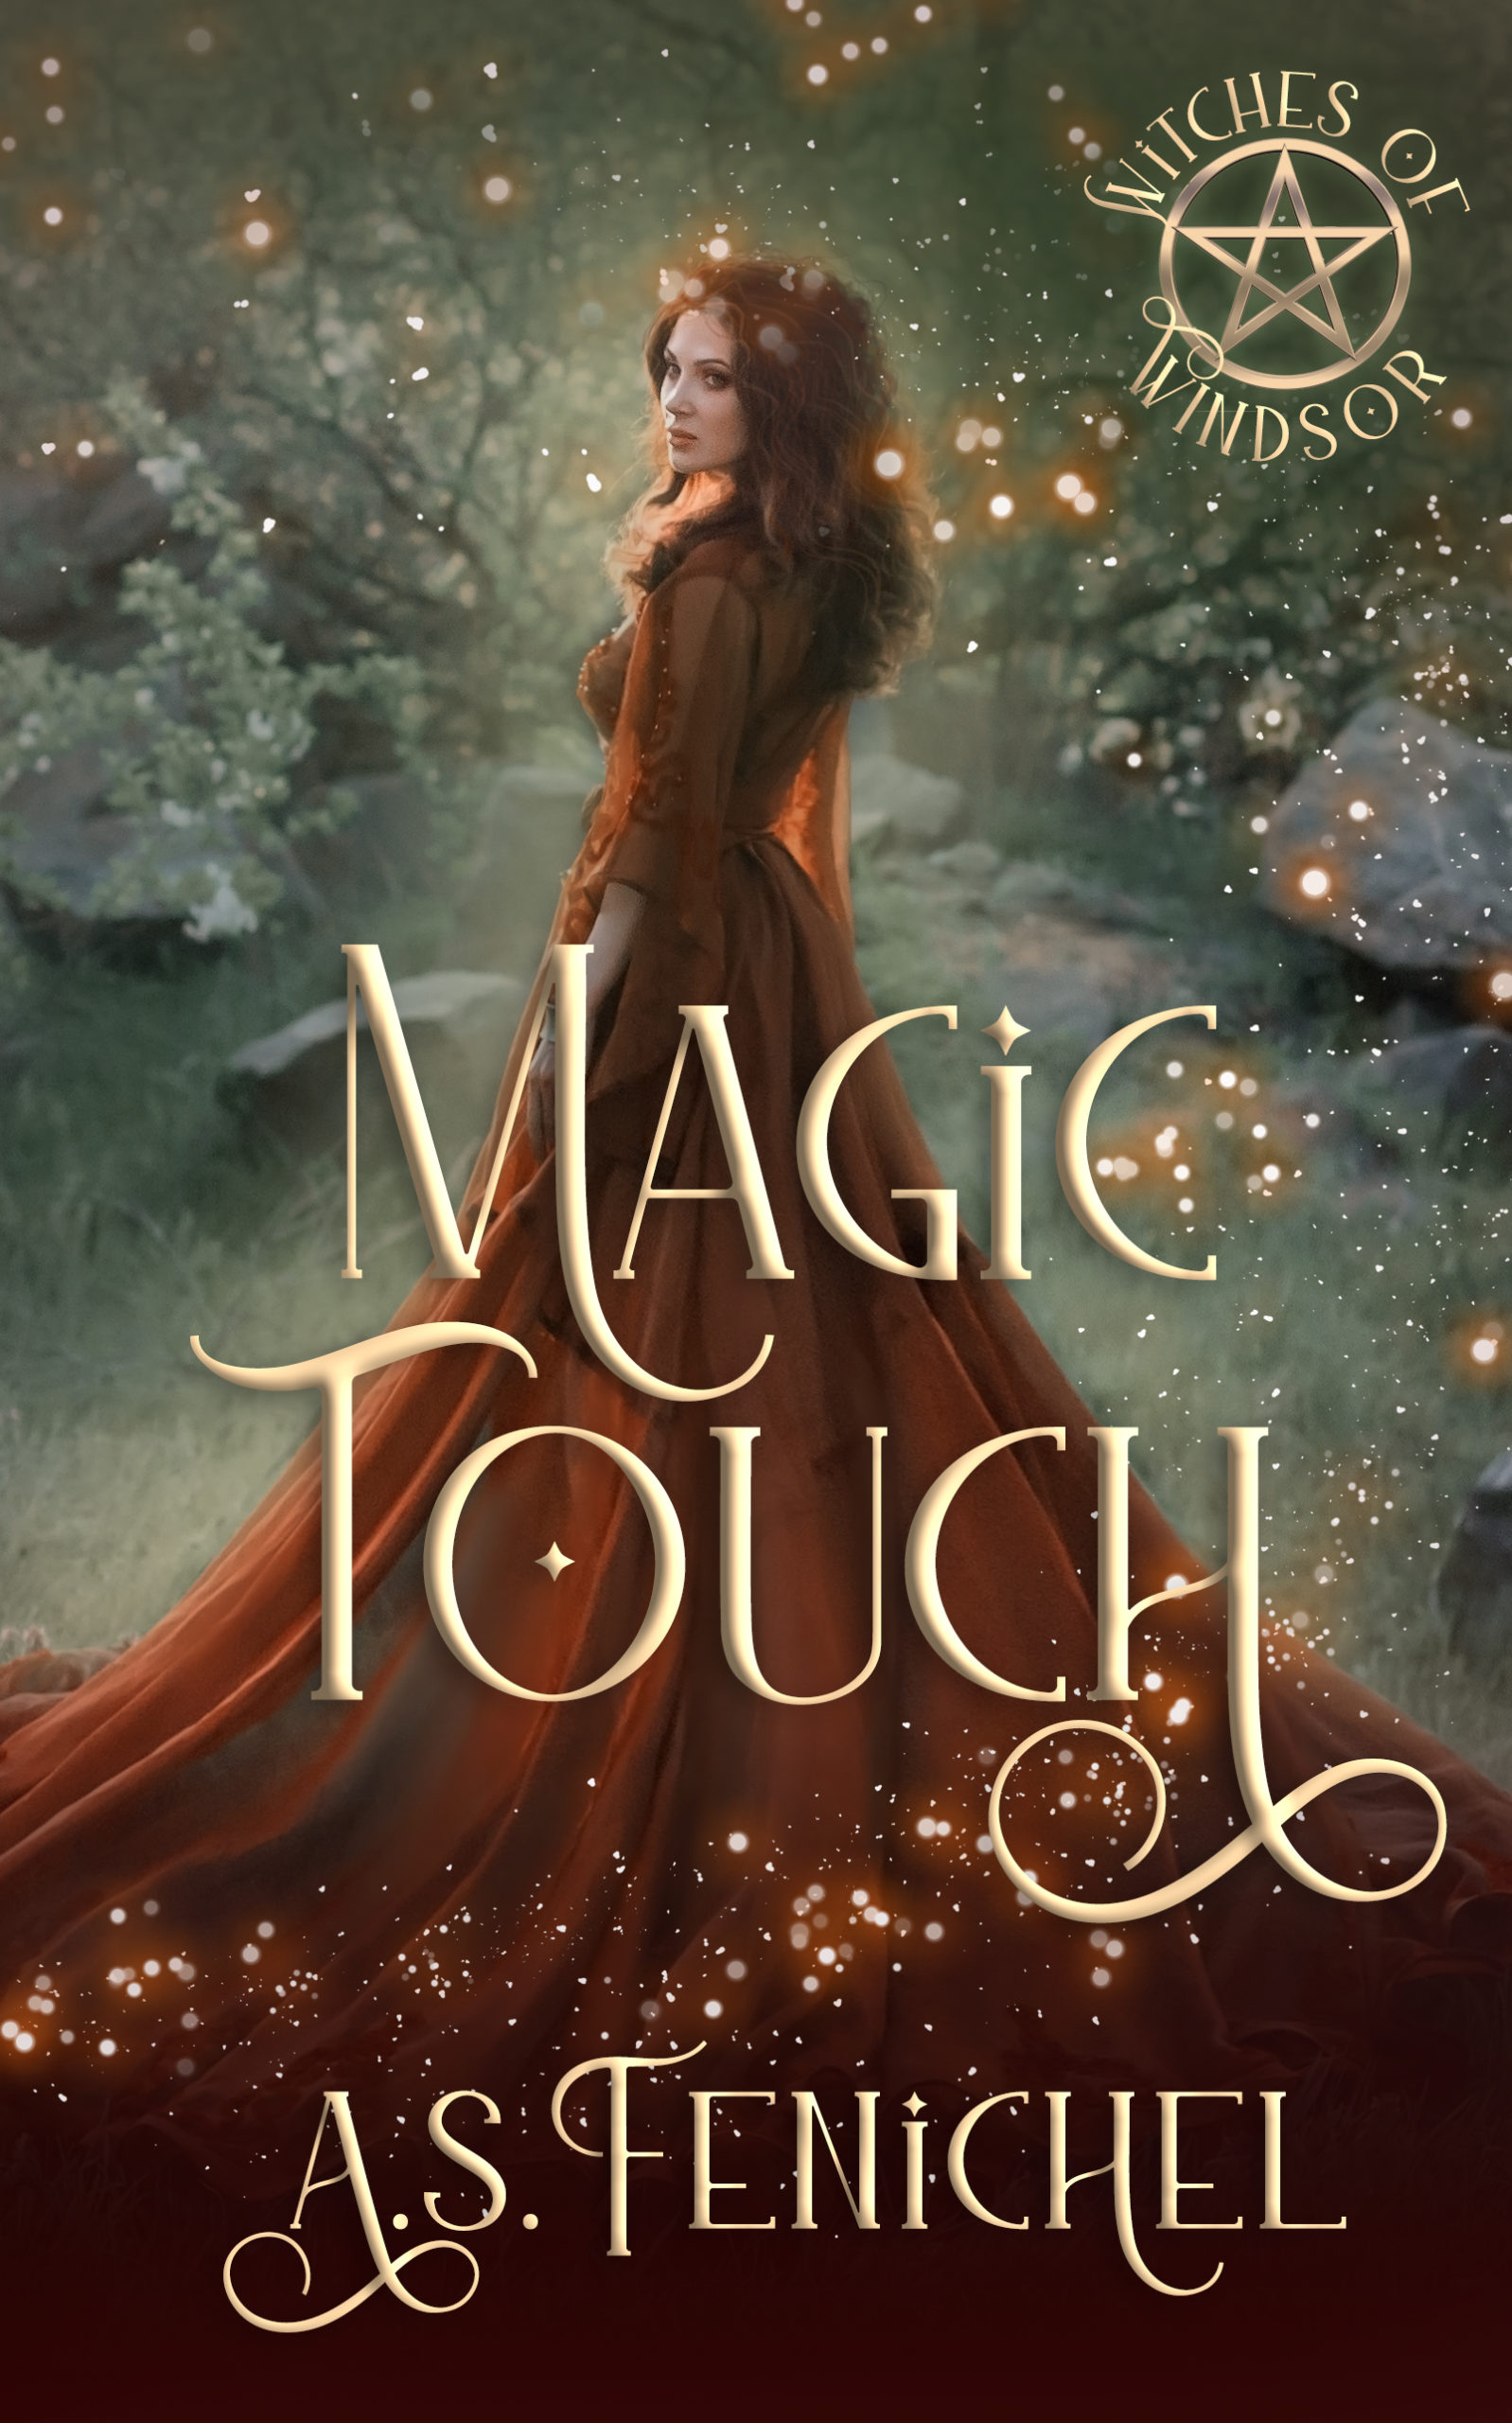 Magic Touch by A.S. Fenichel book cover